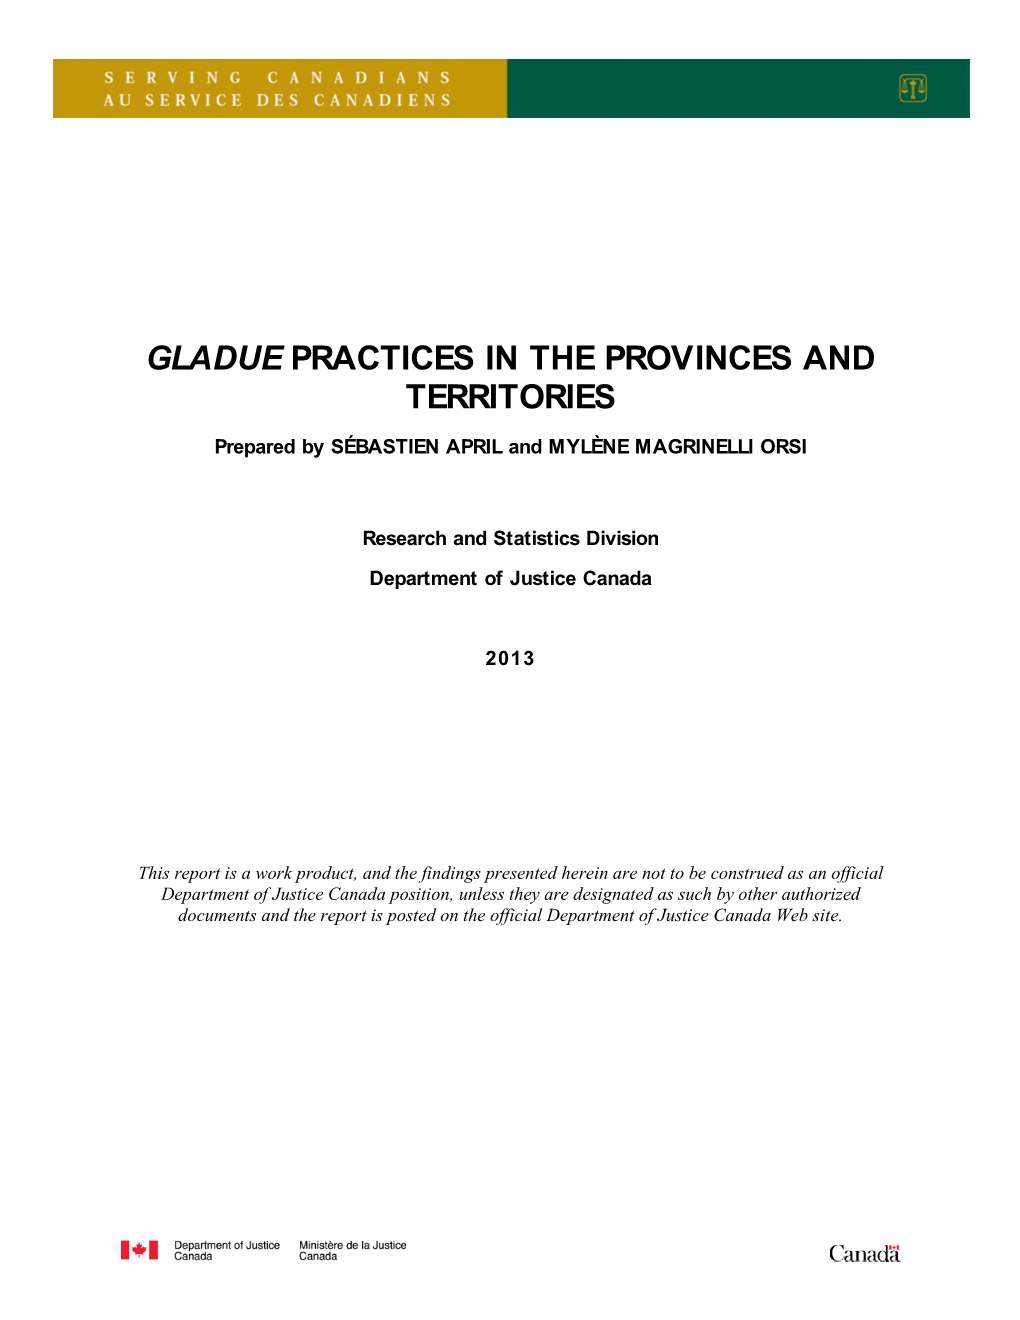 Gladue Practices in the Provinces and Territories